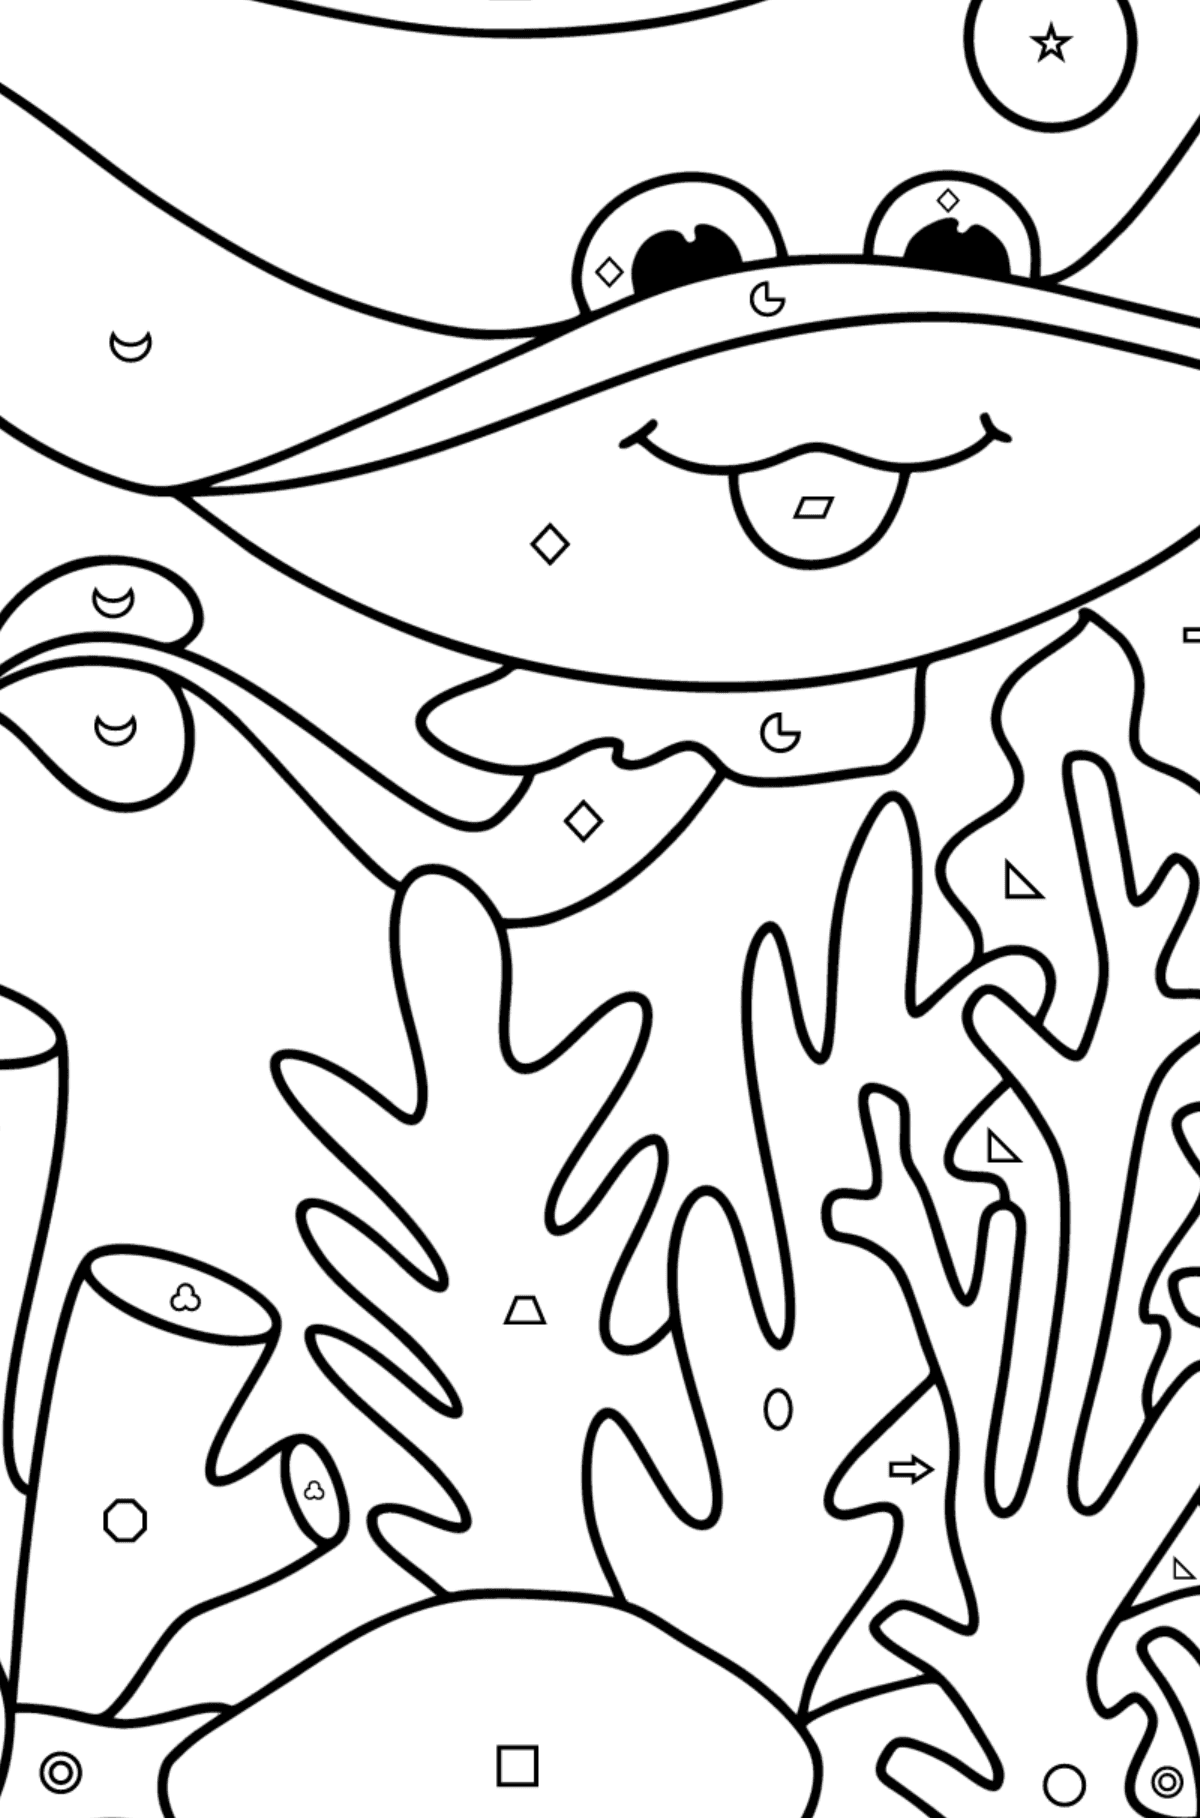 Stingray coloring page - Coloring by Geometric Shapes for Kids